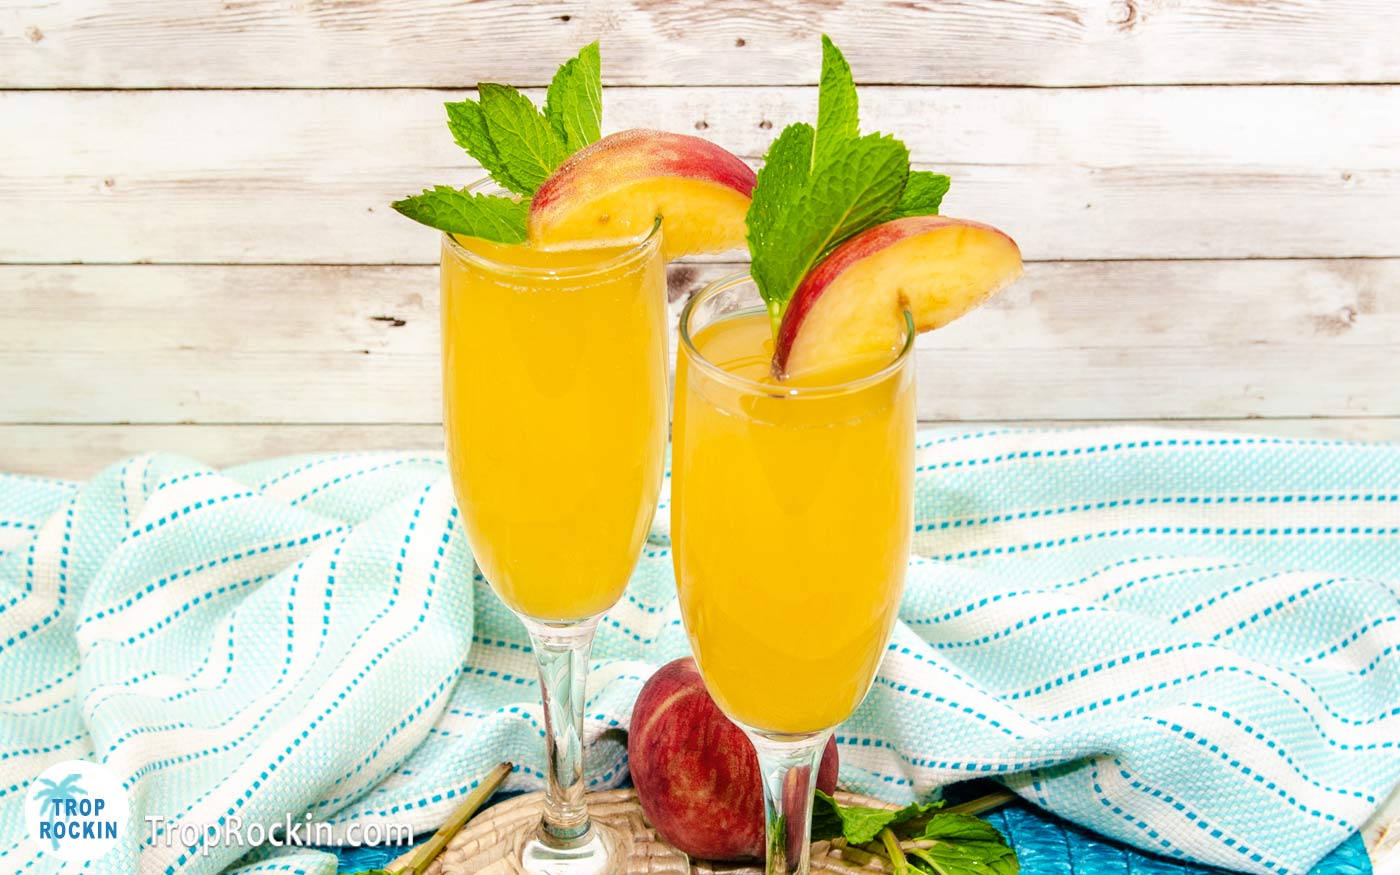 Two glasses of Crown Royal Peach Mimosa drink with peach slices and mint sptrig for garnish.